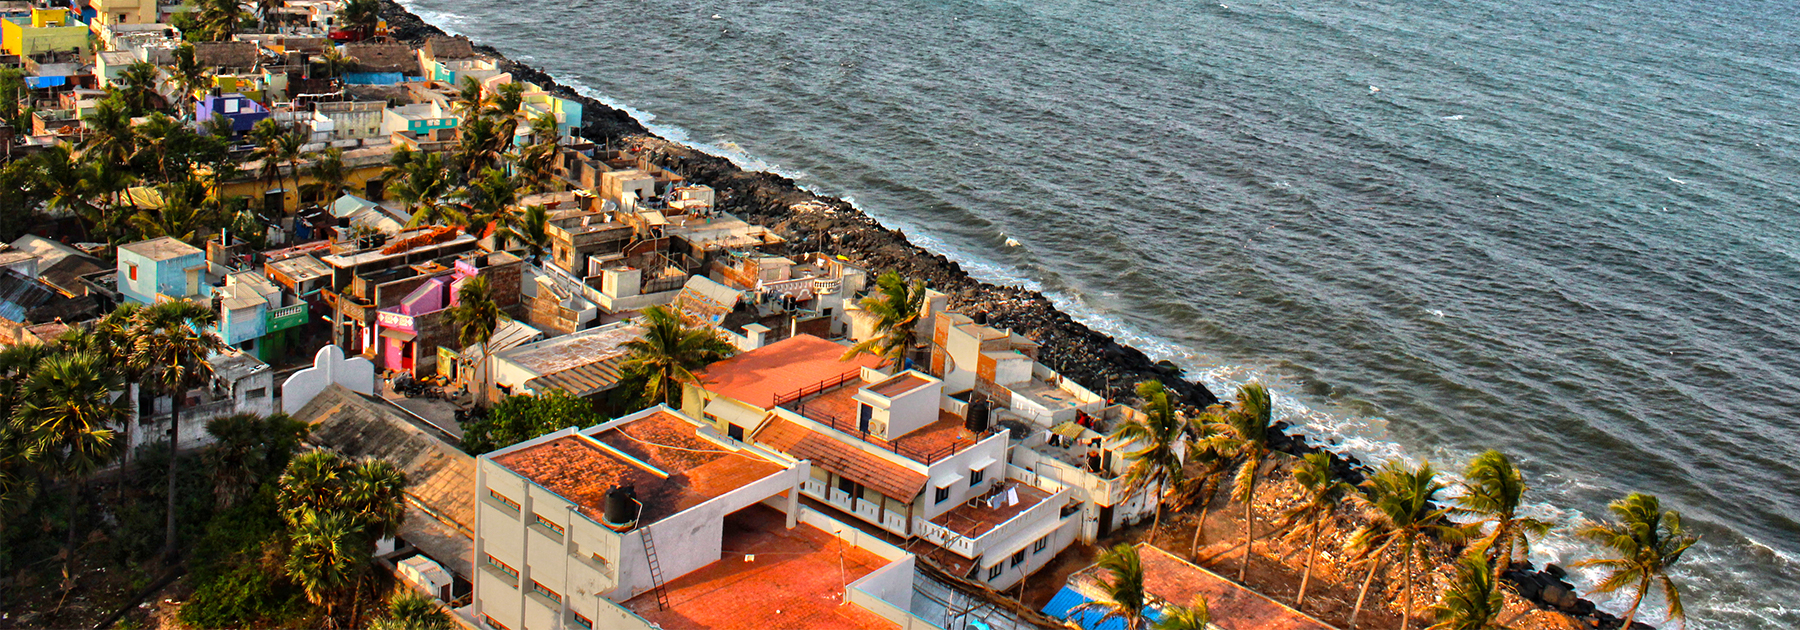 View of Puducherry beach from light house. (Karthik Easvur, licensed under CC BY-SA 3.0)